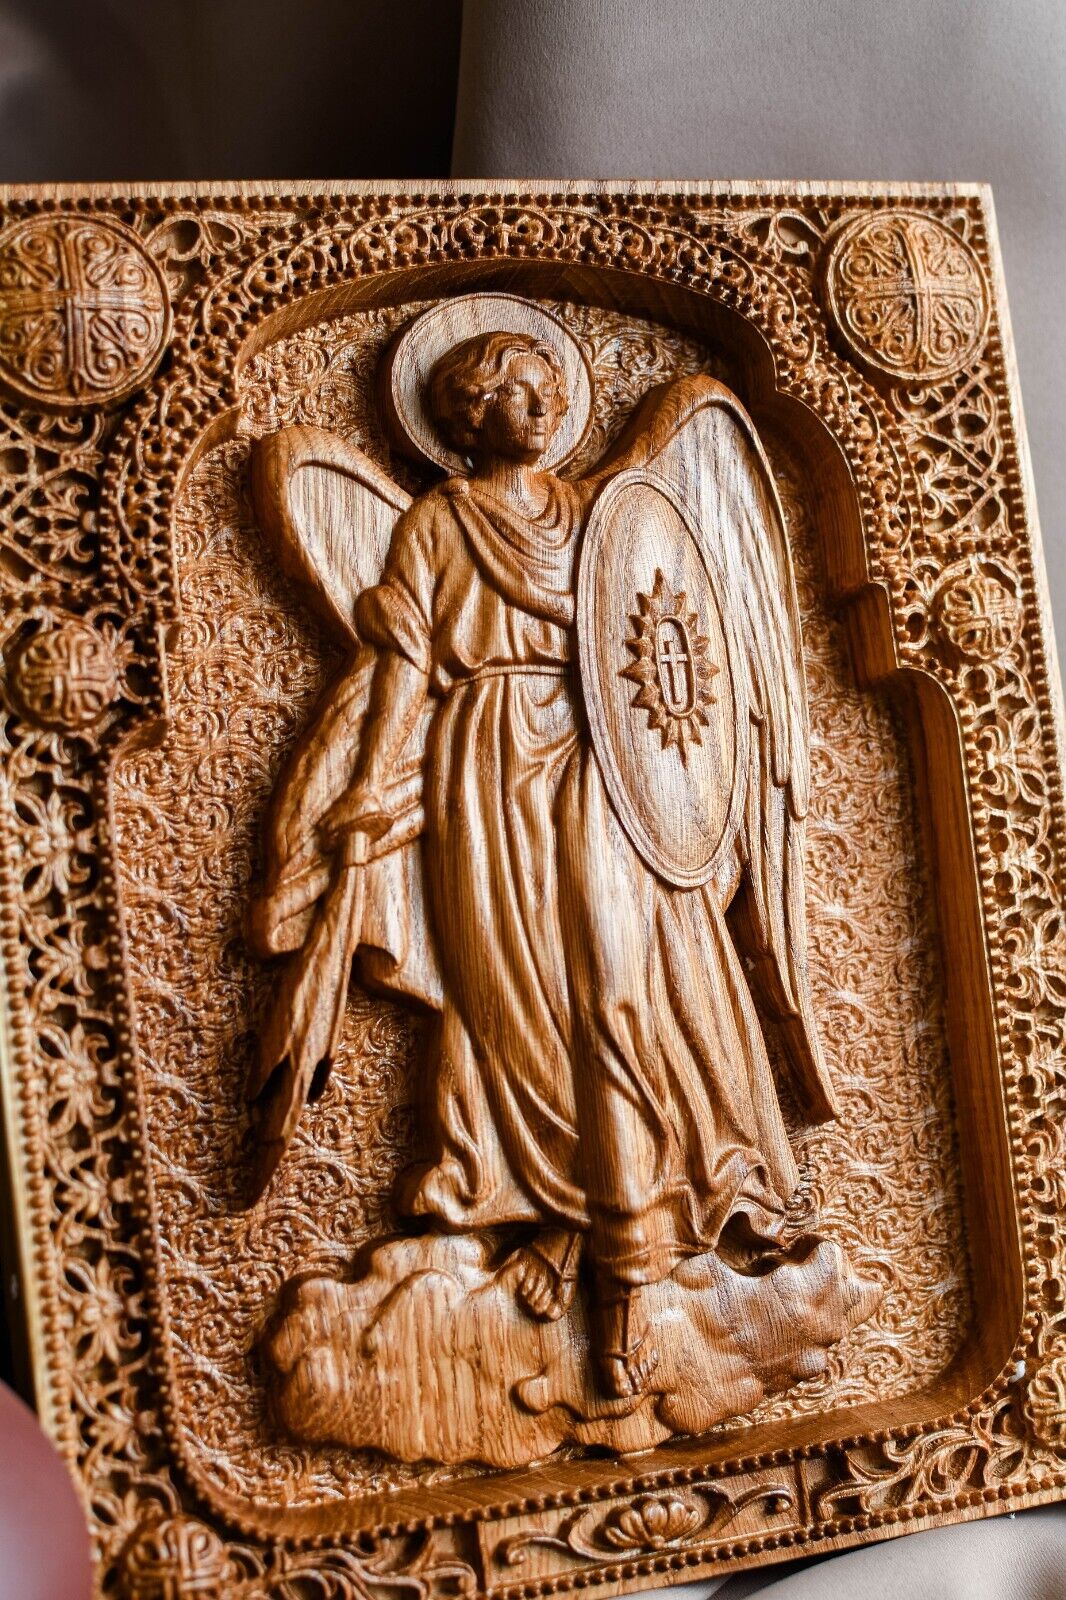 ARCHANGEL MICHAEL WOOD CARVED CHRISTIAN ICON RELIGIOUS WALL HANGING ART WORK